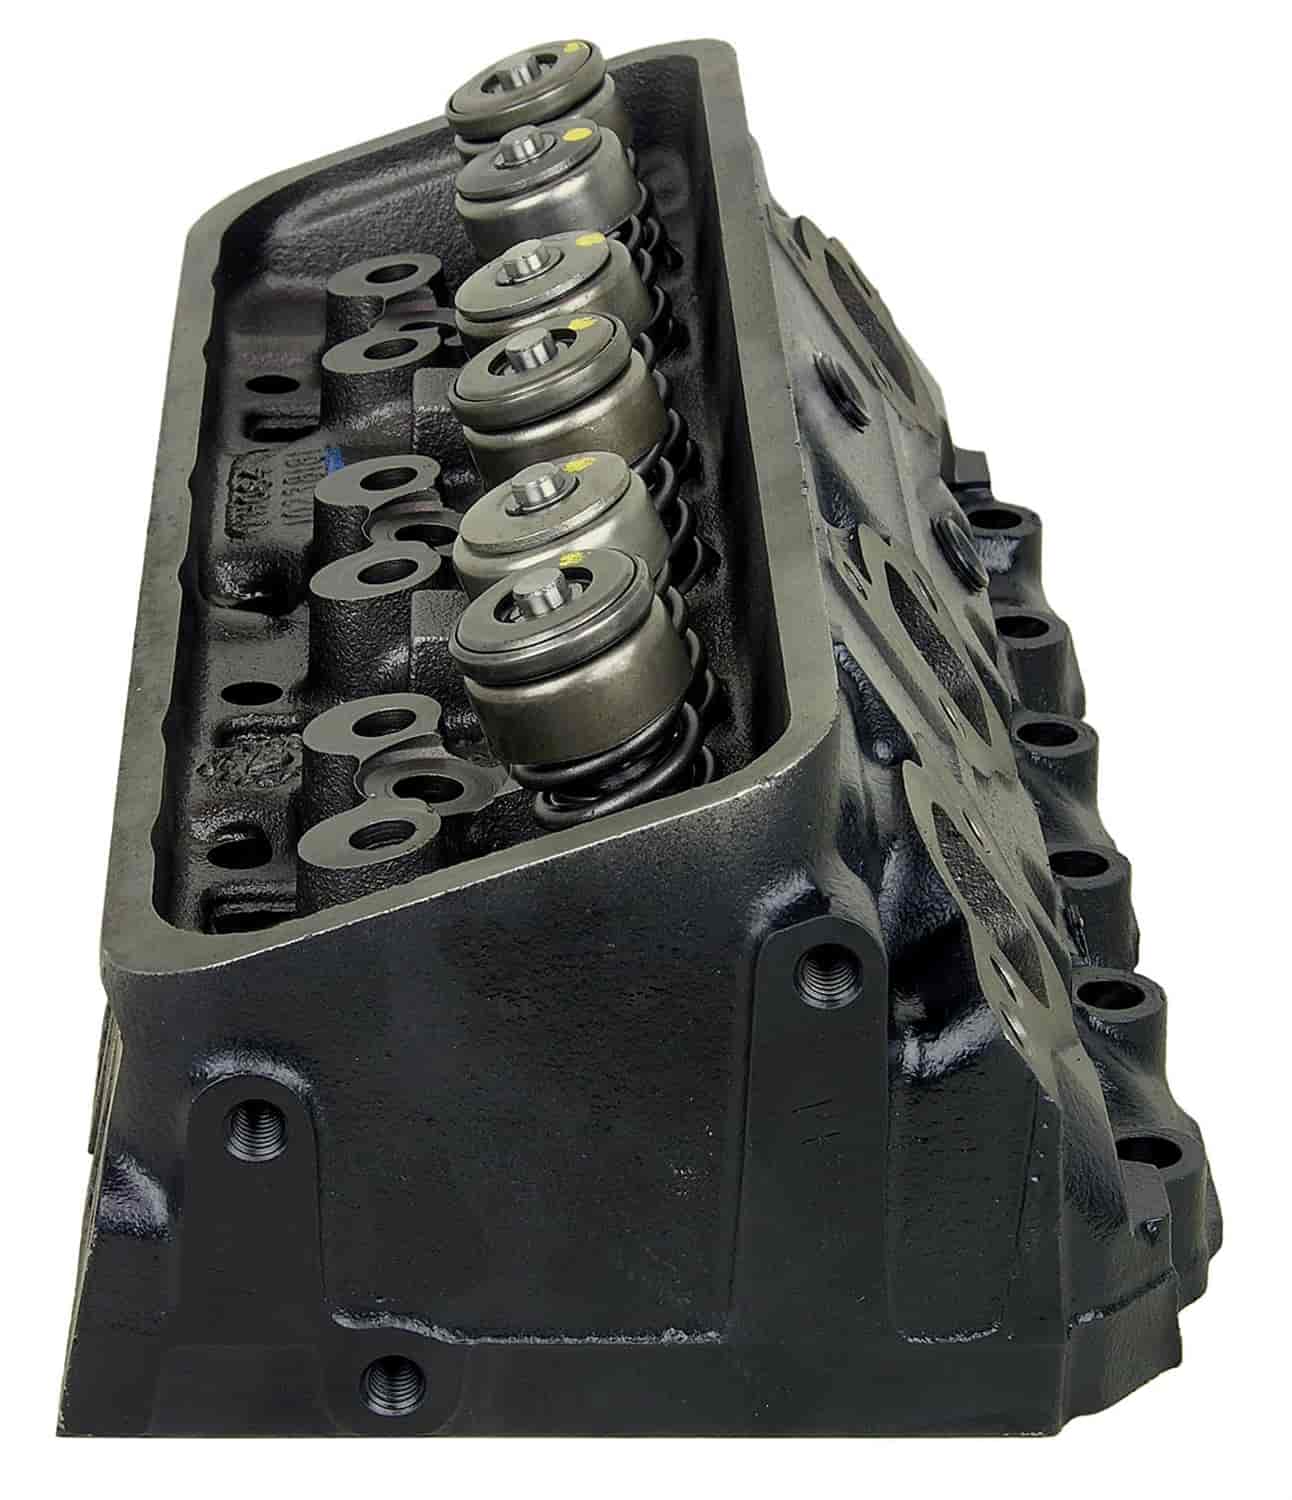 Remanufactured Cylinder Head for 1994-1995 Chevy/GMC/Olds with 4.3L V6